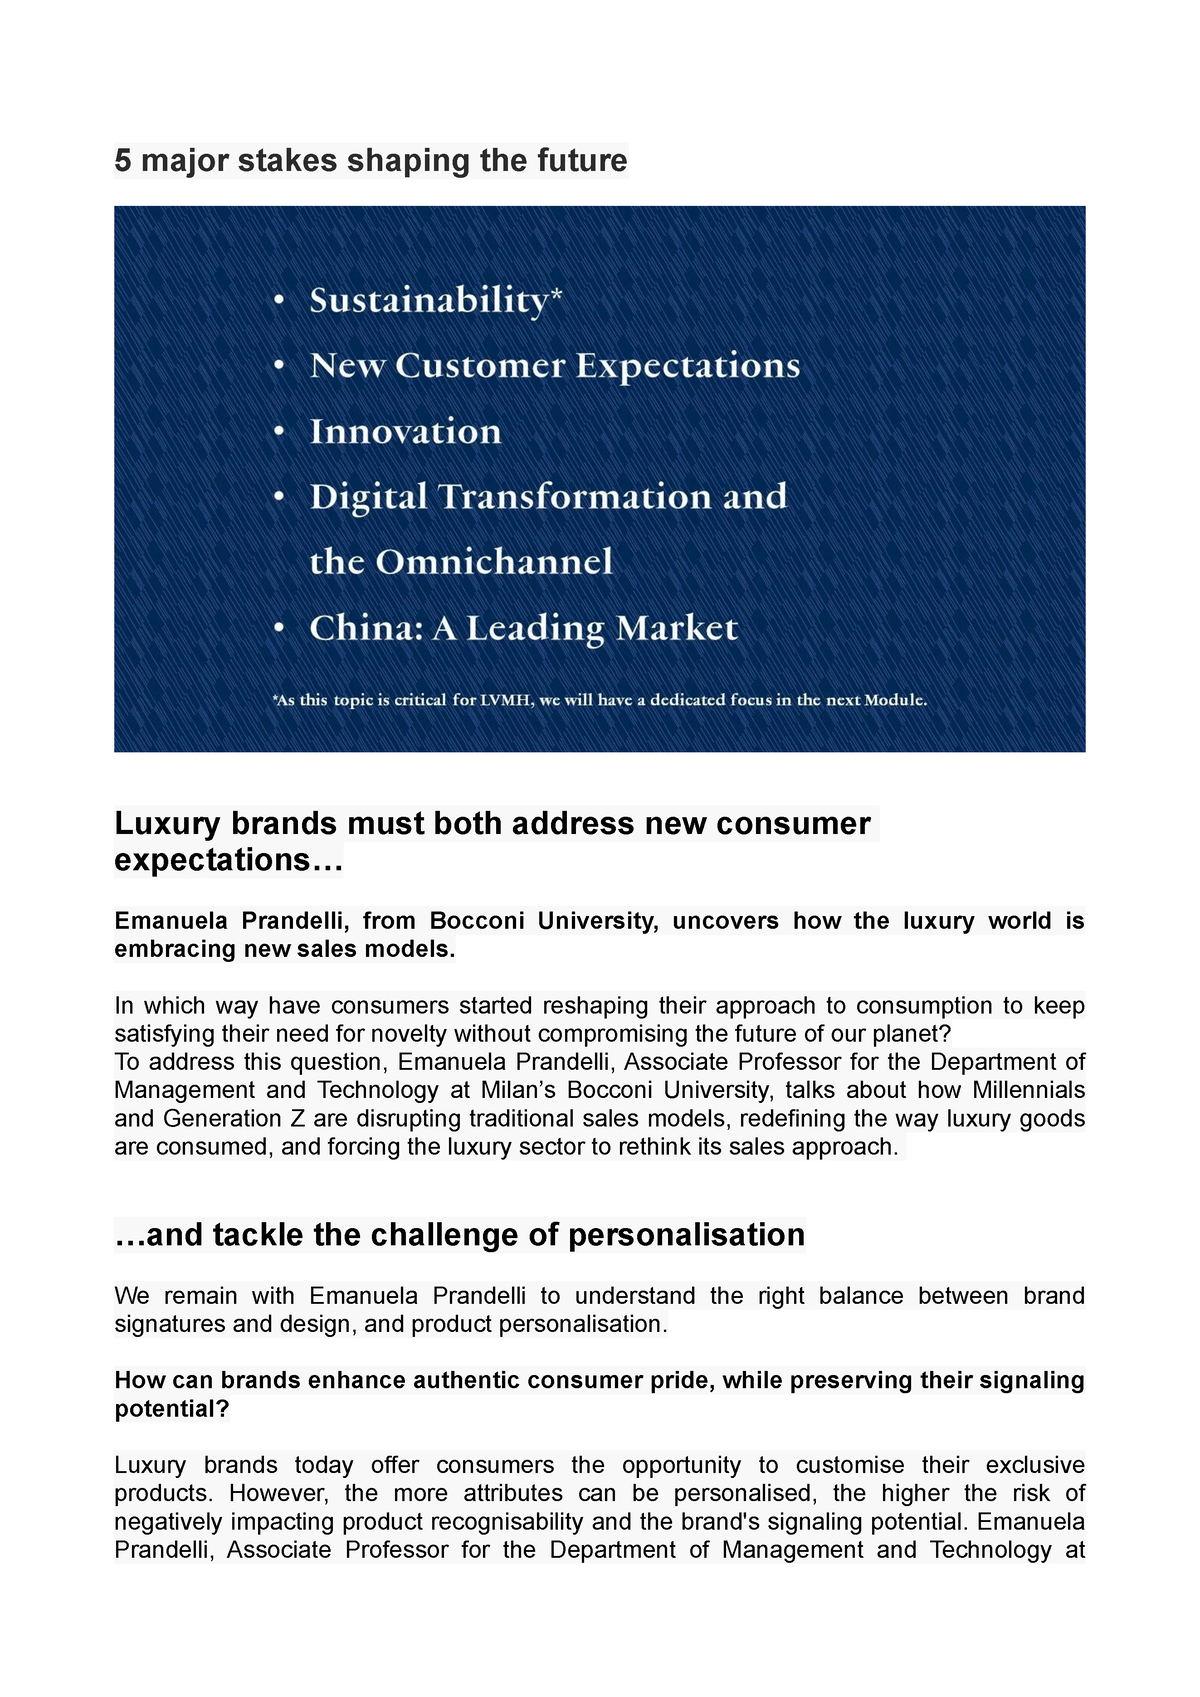 LVMH certificate Module 1 pt2 - 5 major stakes shaping the future Luxury  brands must both address - Studocu